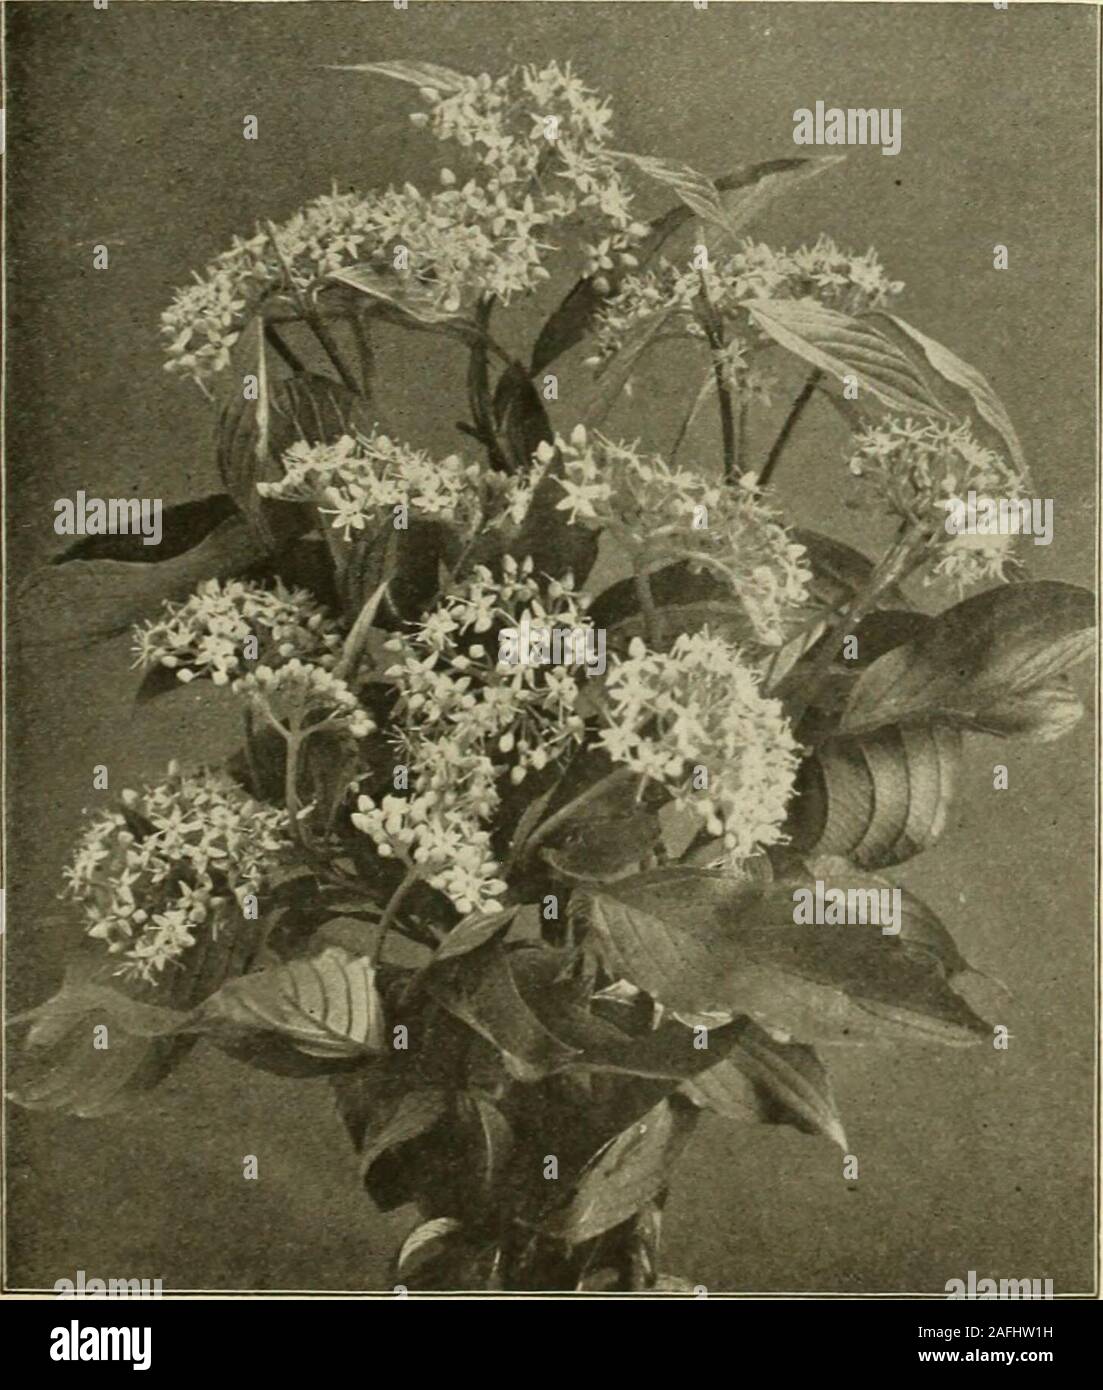 . Farquhar's autumn catalogue : 1913. entaphylla. A beautitul Japanese shrub ofirapid growth, branches furnished with spines, leavespalmate, five lobed and pale green .... Spinosa. {See Ornamental Trees, page sg.)Azalea Pontica, or Hardy Ghent. Magnificent large-flowering hybrids in various fine colors; June. Mollis. A gorgeous spring-flowering dwarf shrub, the,flowers of which come before the foliage, literally]making the plant a blaze of color. The colors rangefrom light yellow to orange-salmon, flame color andcopper-red. It is valuable for partially shaded sit-uations where few shrubs thriv Stock Photo